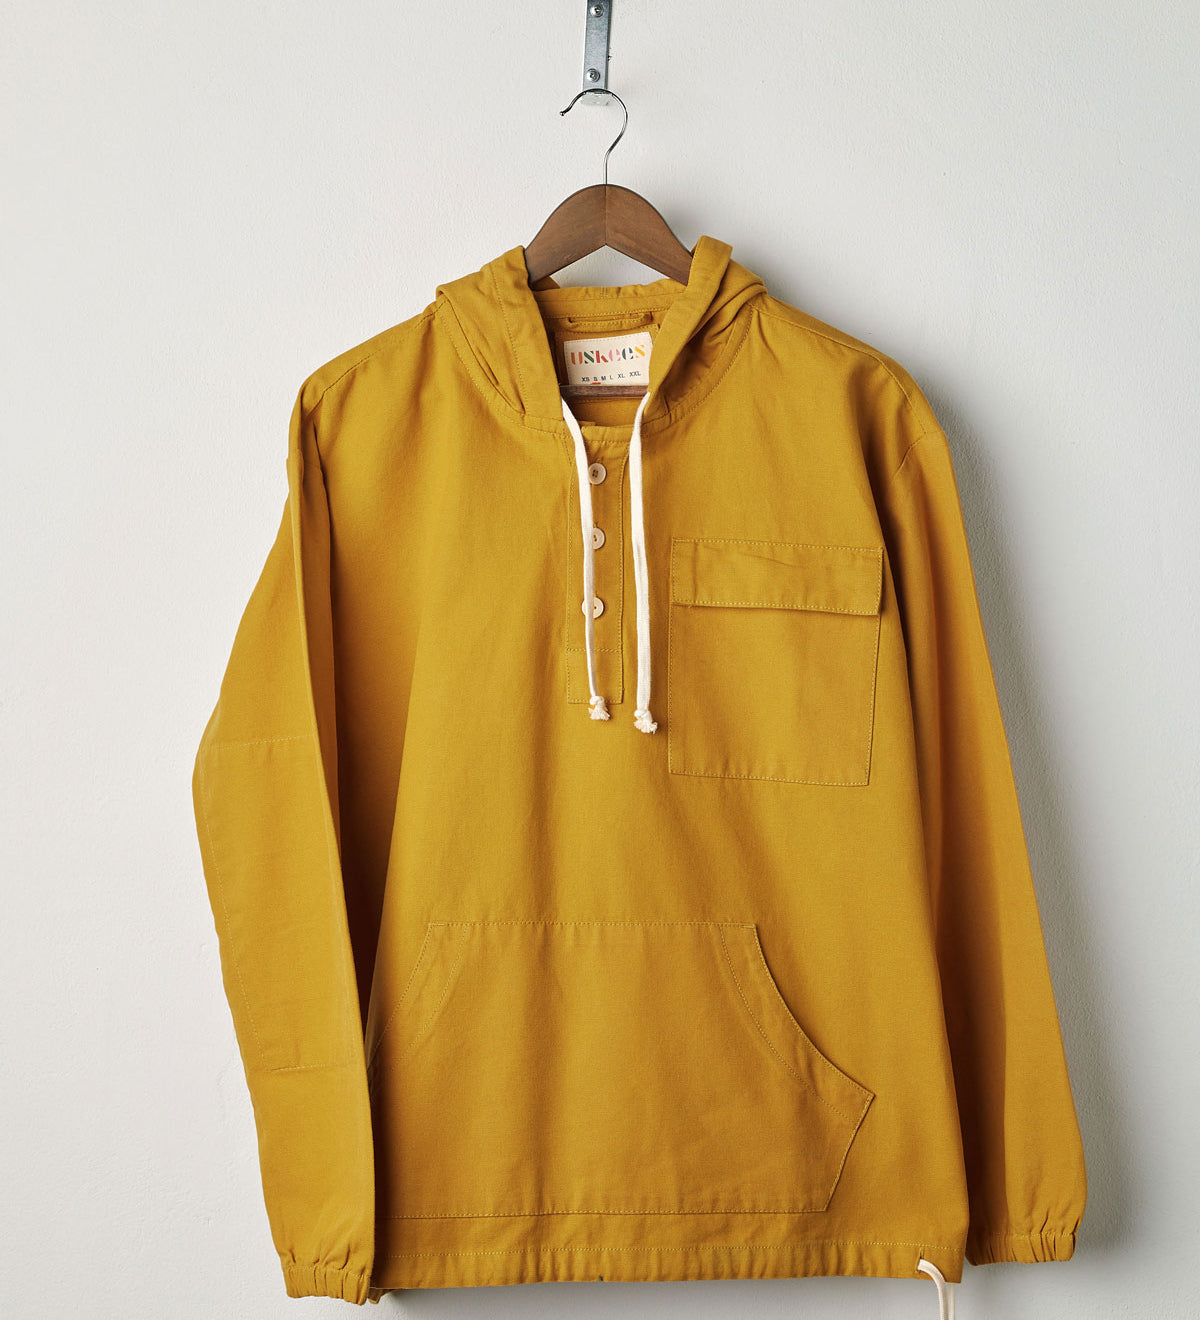 Front view of yellow coloured buttoned smock from Uskees with deep front pockets. Presented on hanger with white backdrop.